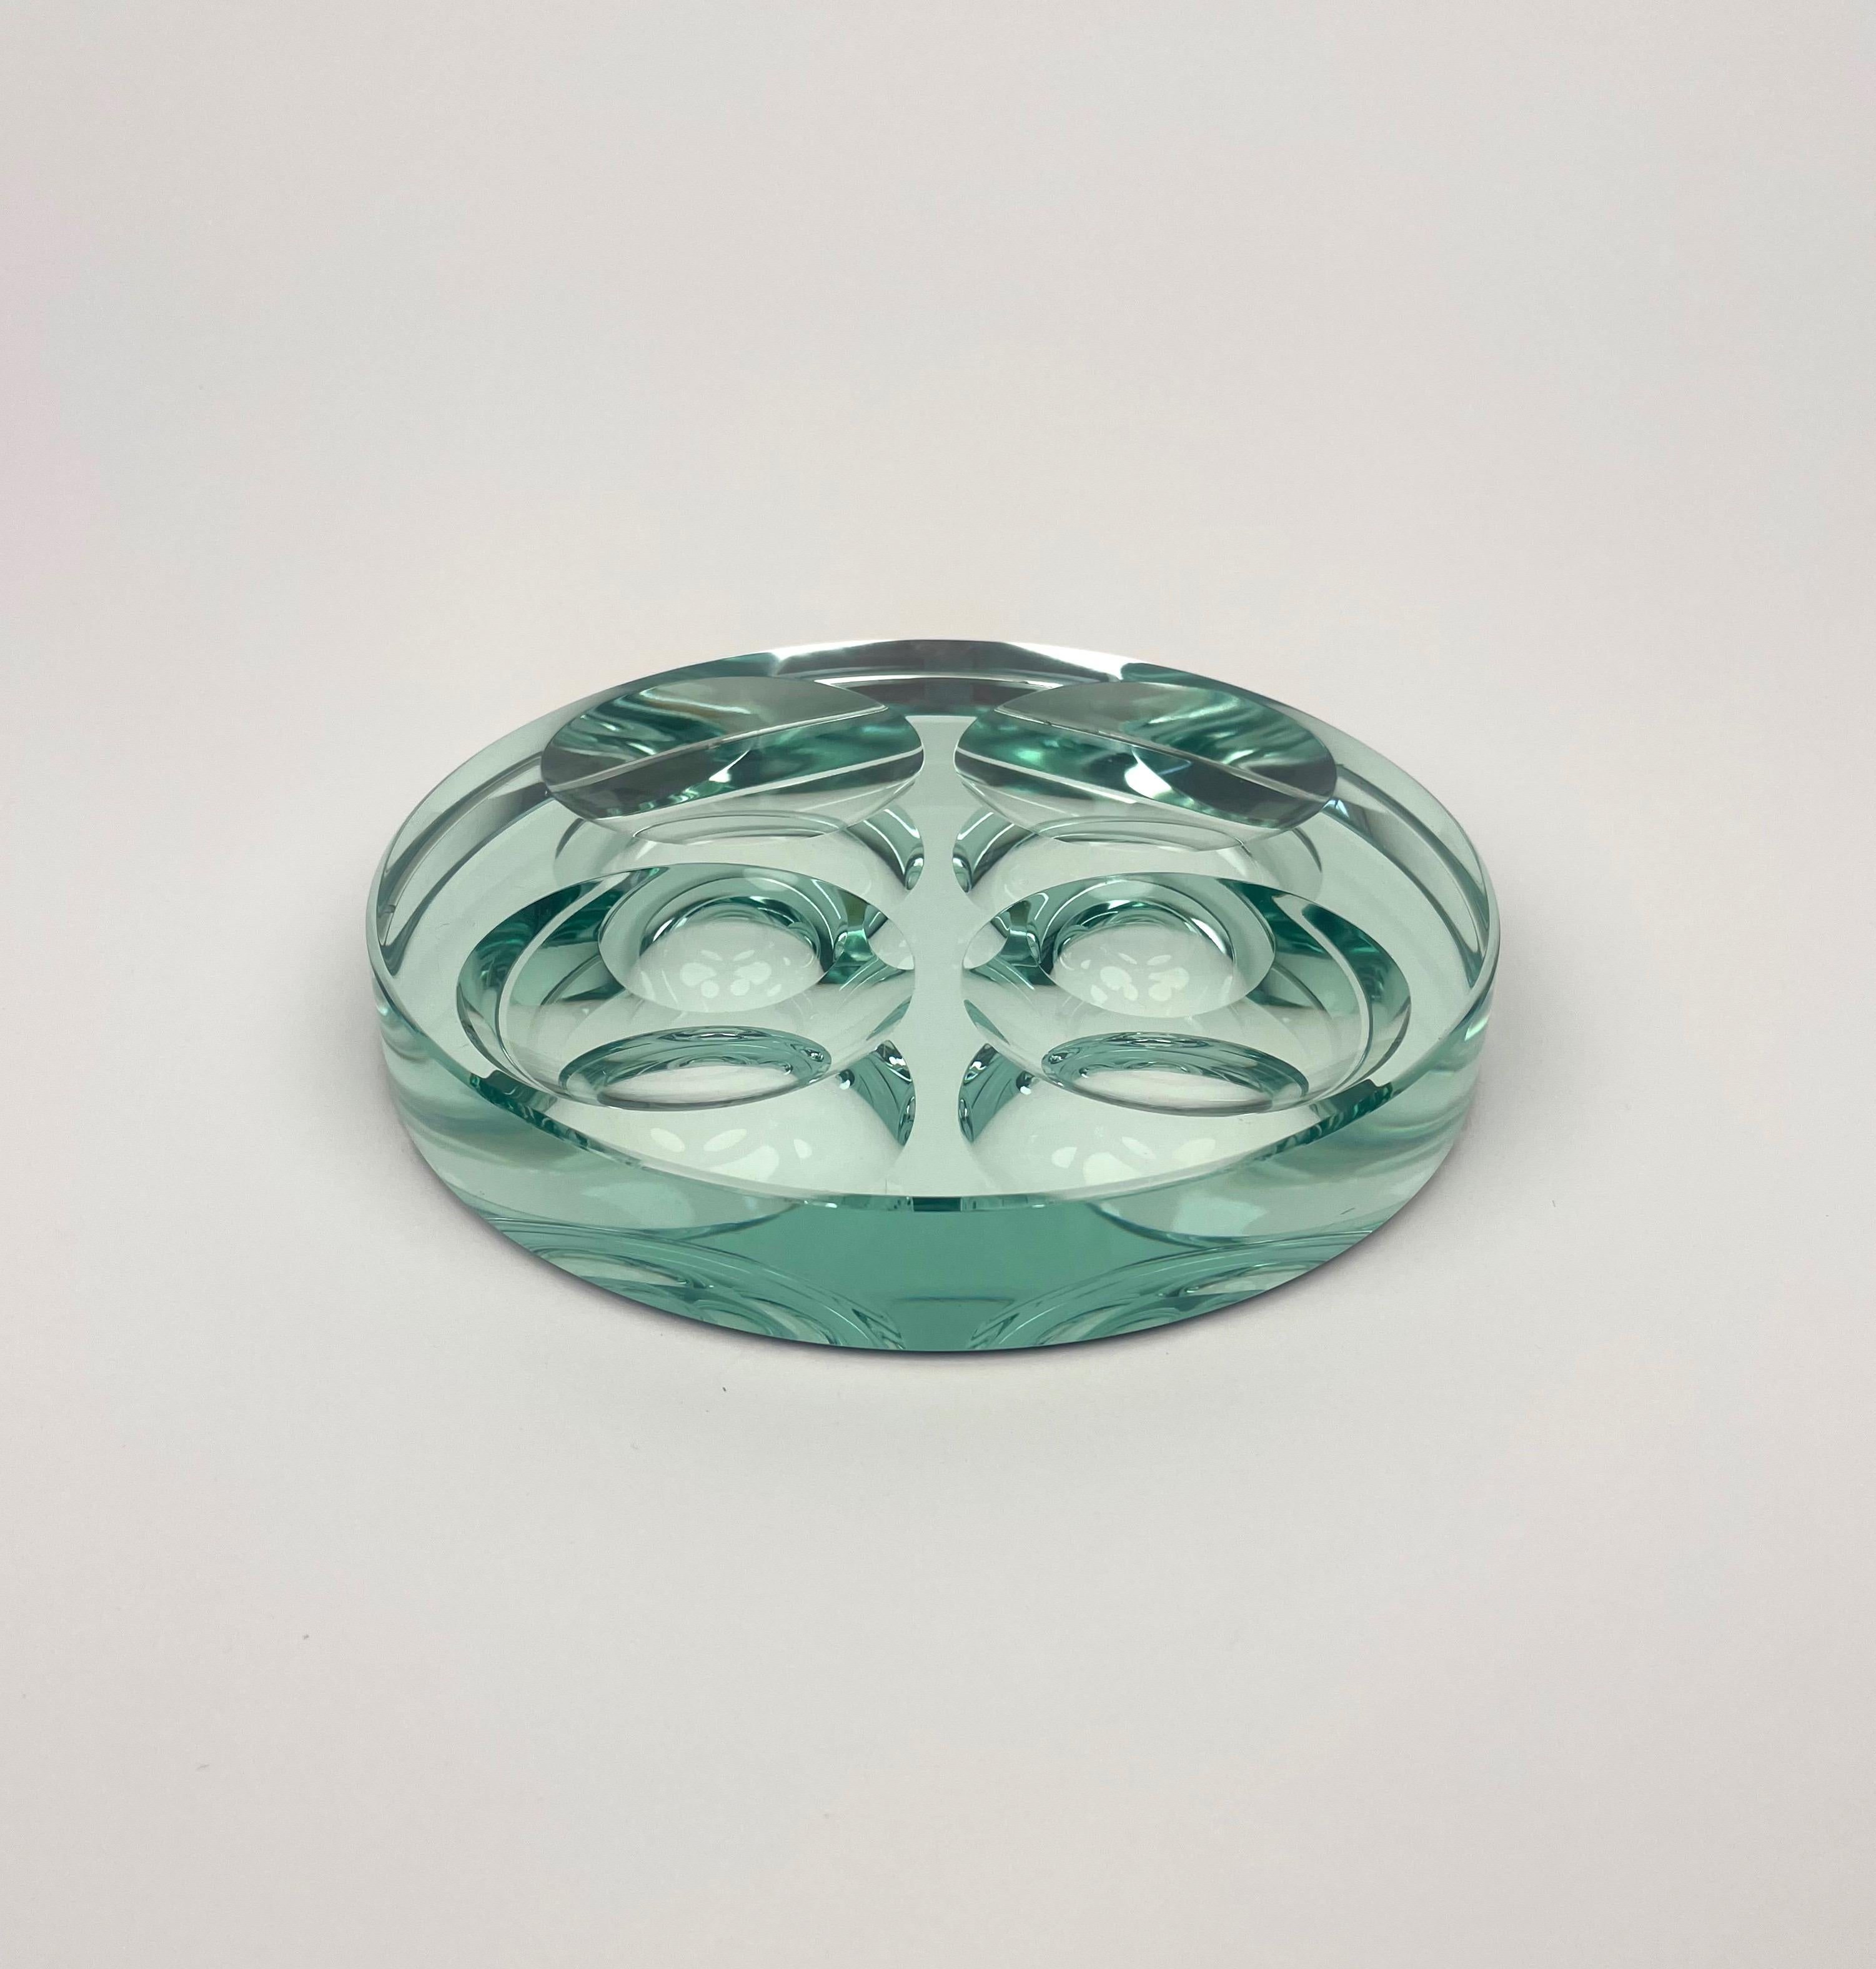 Mid-20th Century Round Bowl or Ashtray in Green Glass Mirrored by Fontana Arte, Italy 1960s For Sale